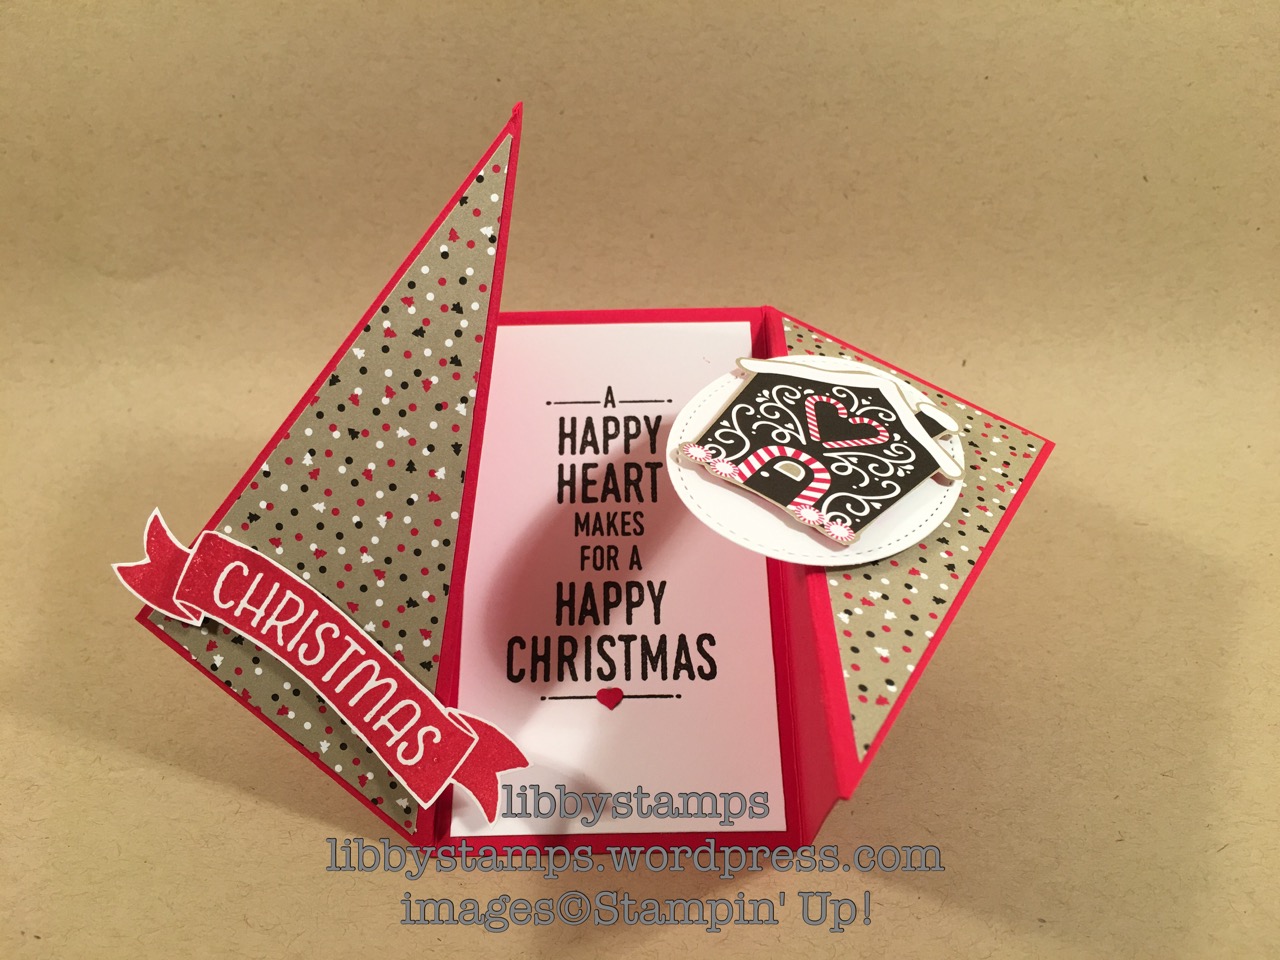 libbystamps, stampin up, Stitched Shapes Framelits, Candy Cane Lane, Suite Seasons, Time of Year, Twist Gate Fold